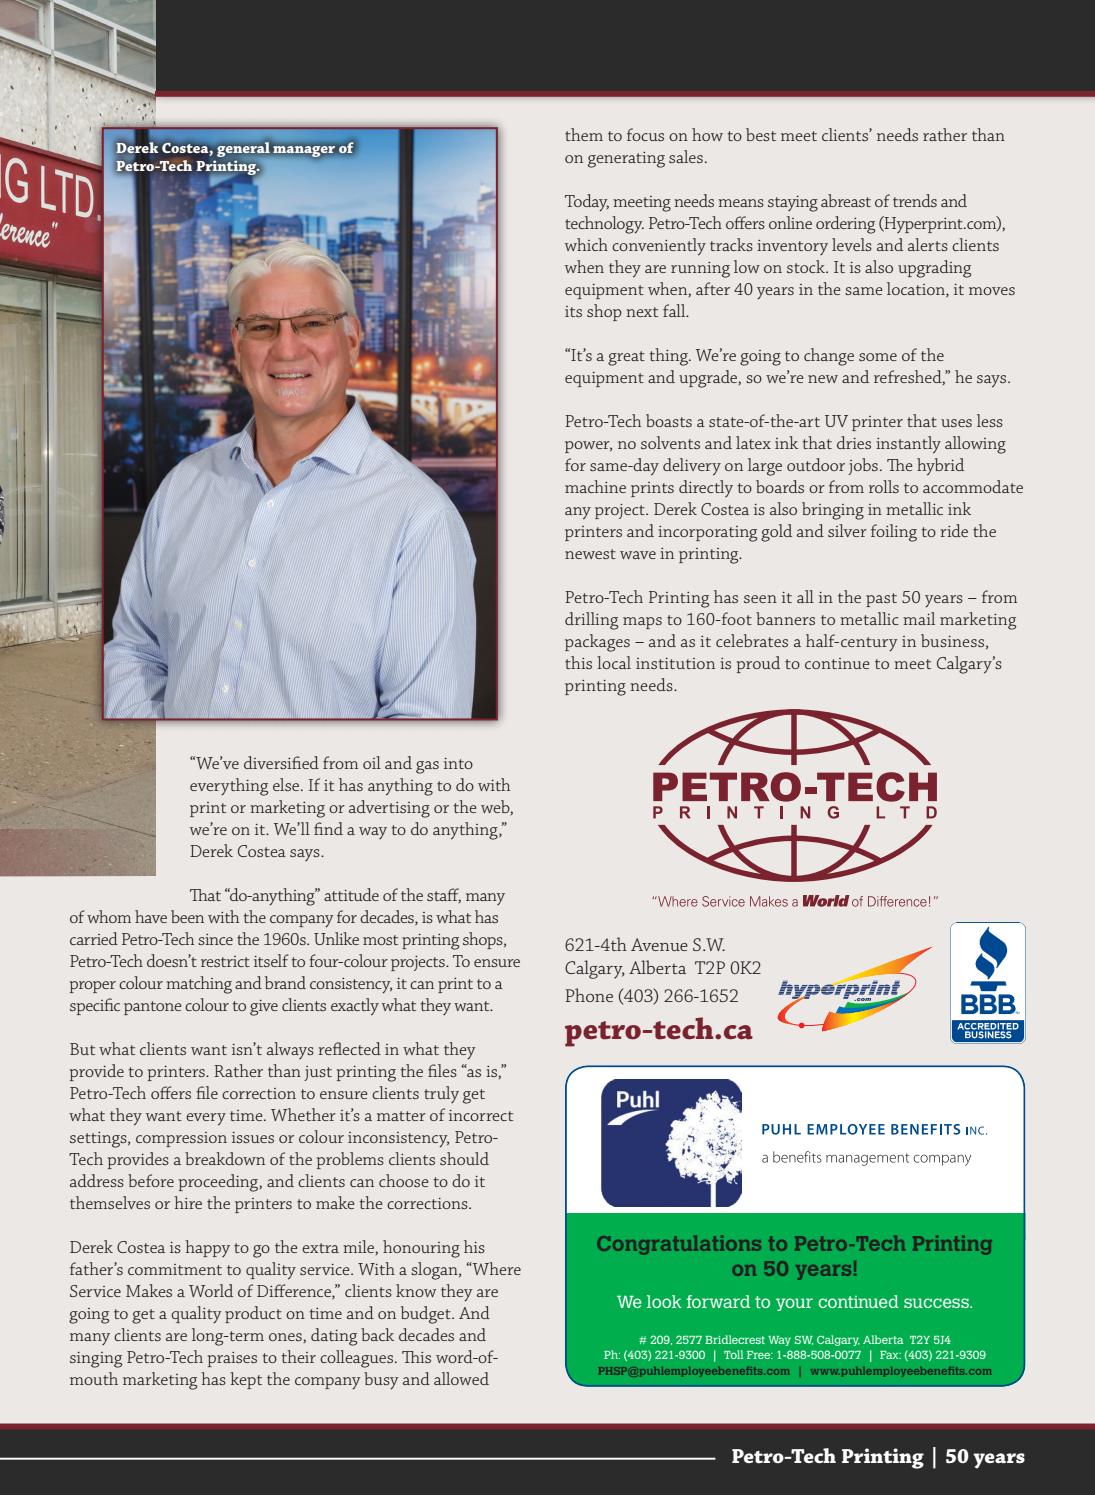 Business in Calgary Magazine - Business Profile for Petro-Tech Printing